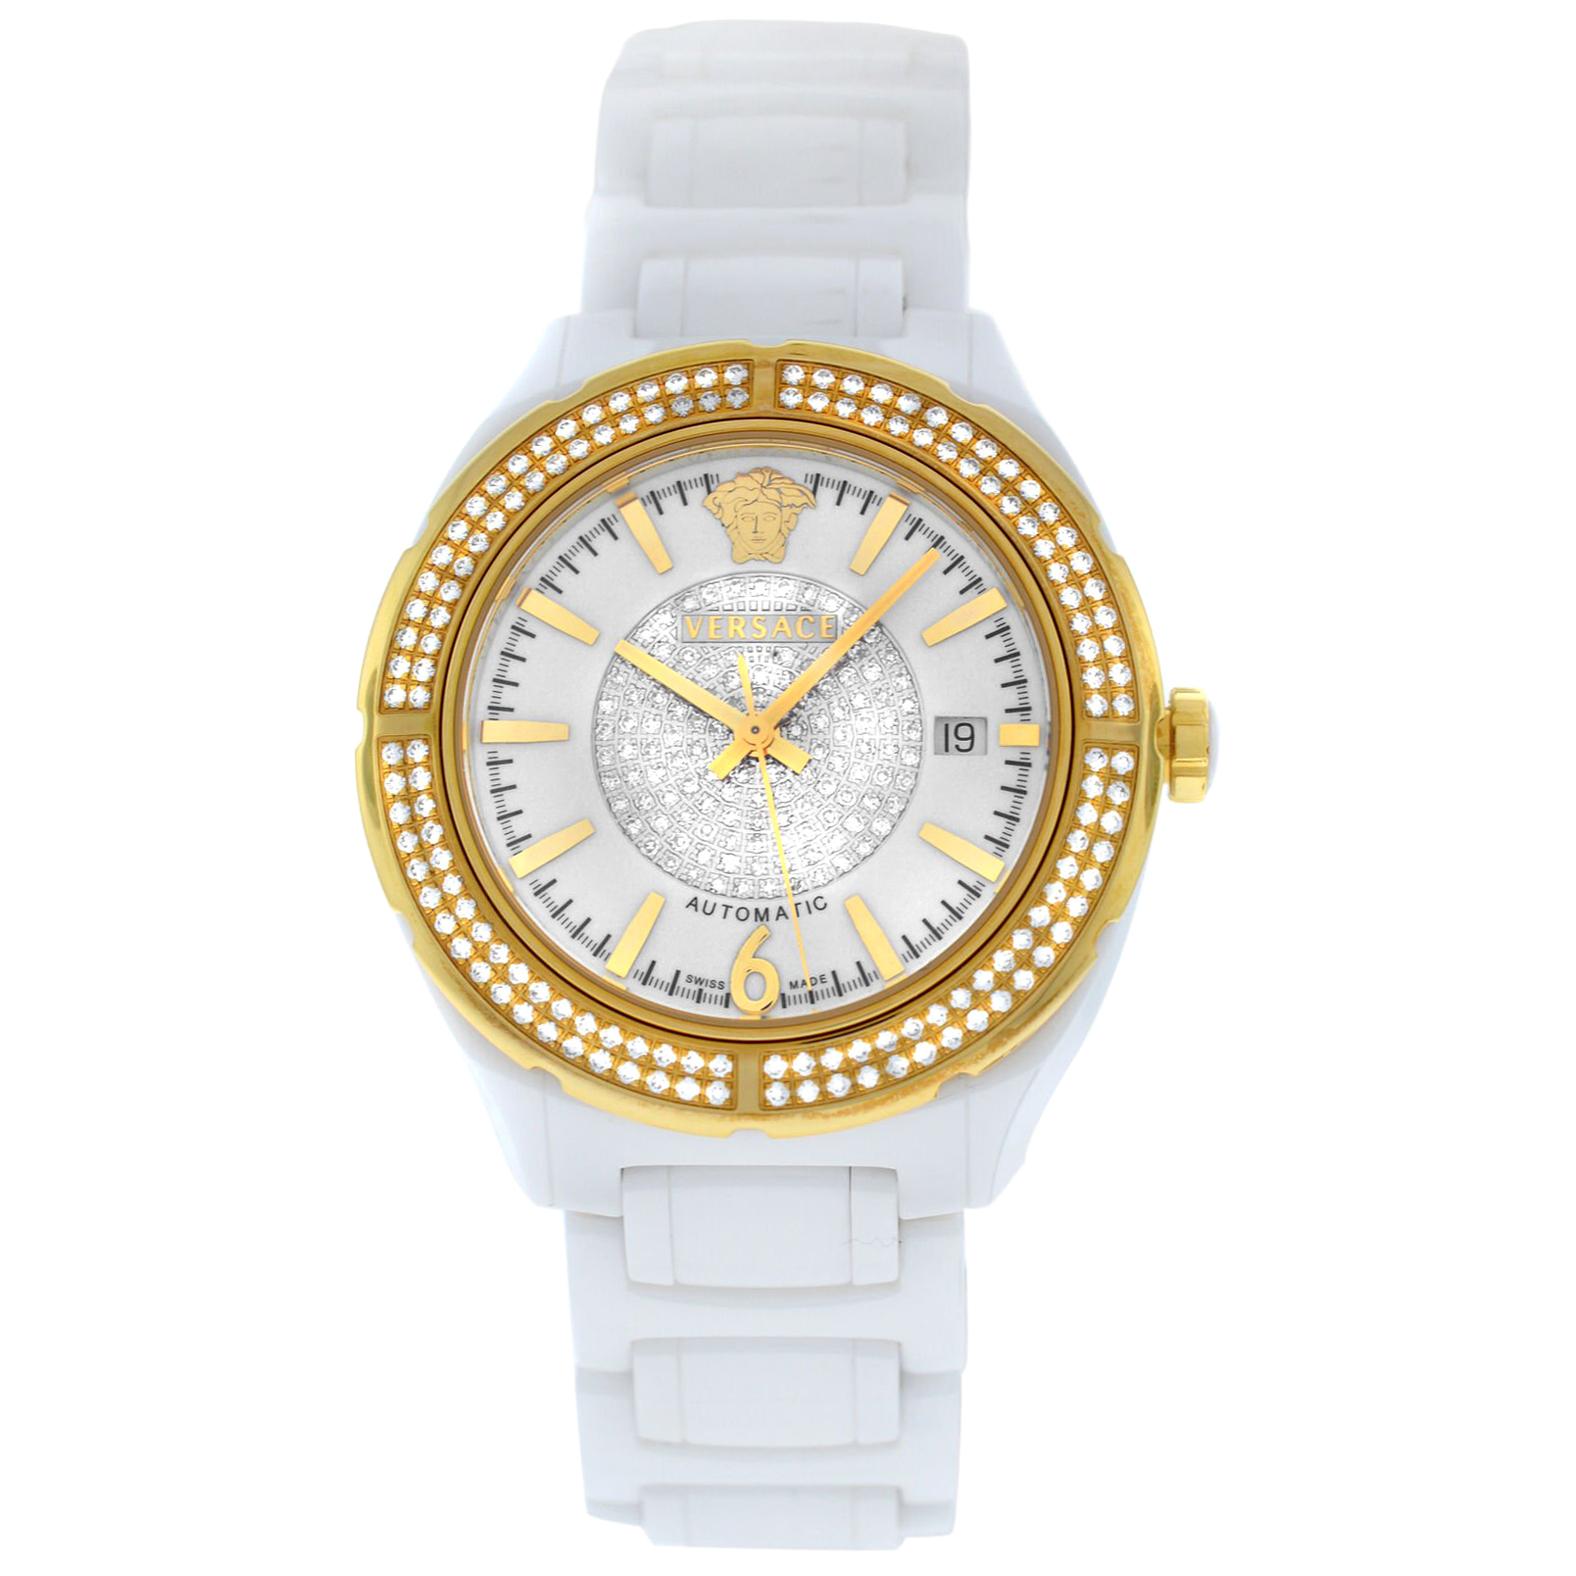 New Versace DV One Ceramic Diamond Automatic Date Watch For Sale